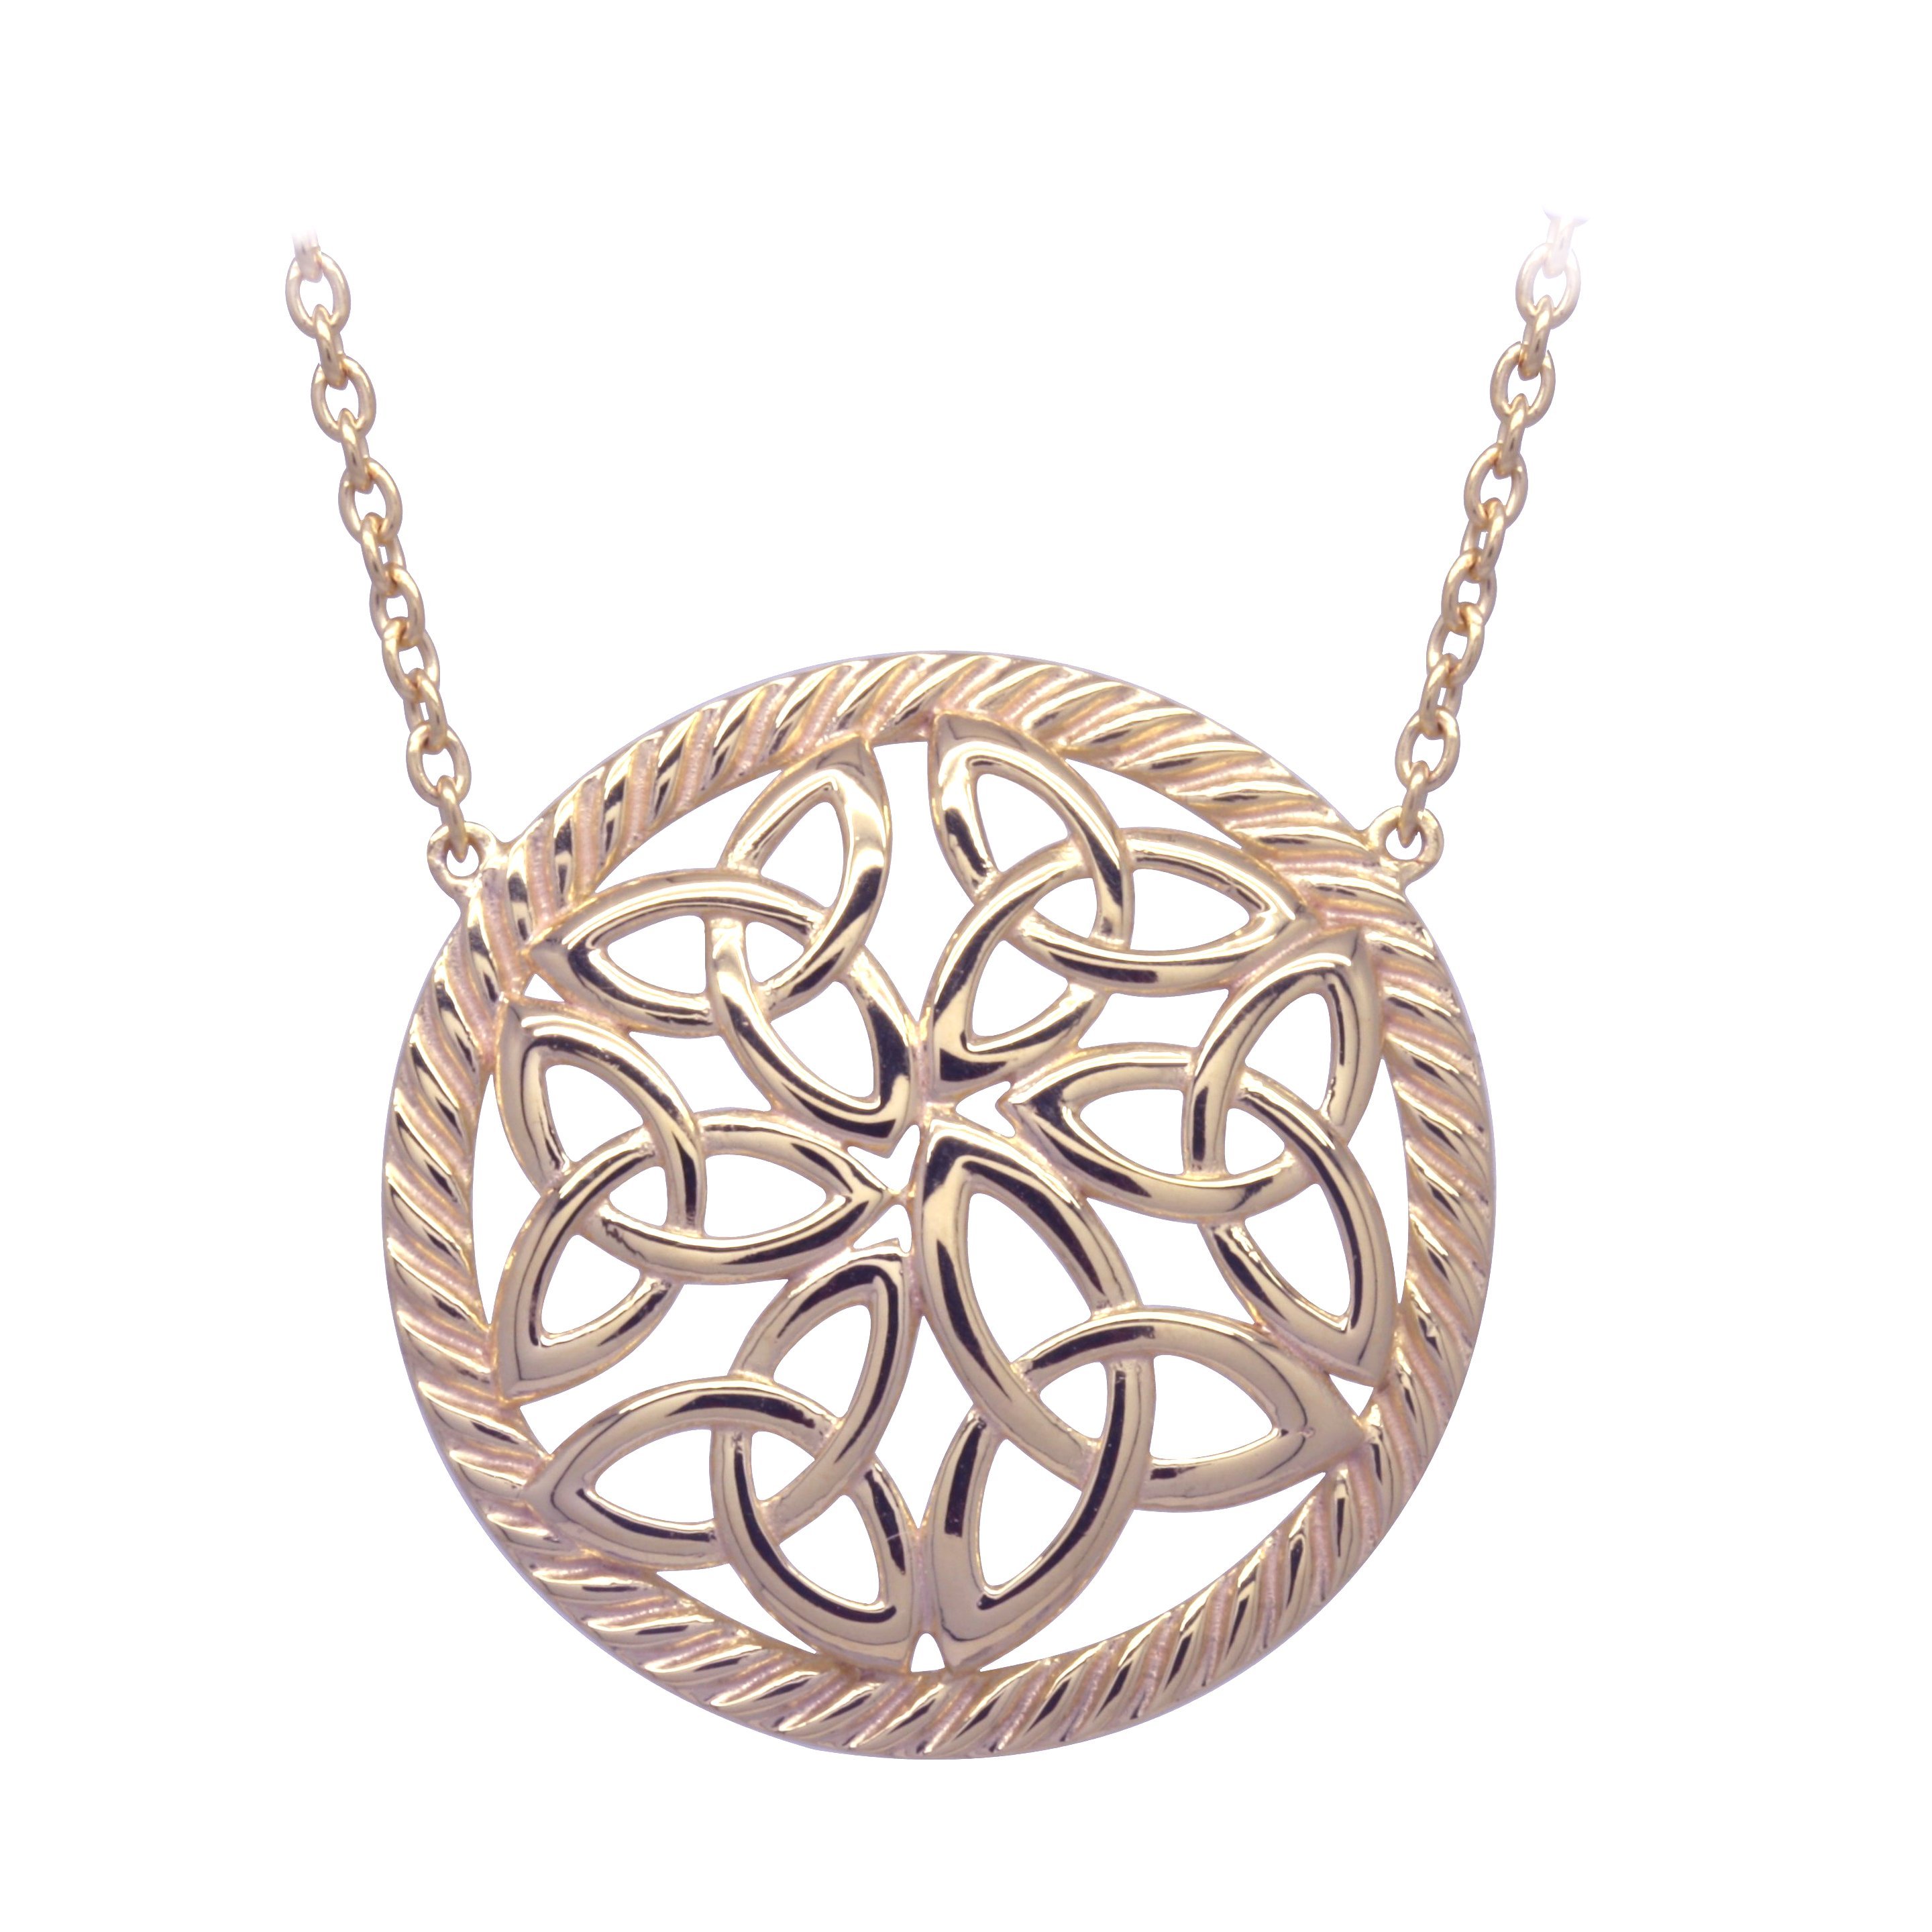 Product image for Irish Necklace | Rose Gold Plated Sterling Silver Trinity Knot Round Pendant